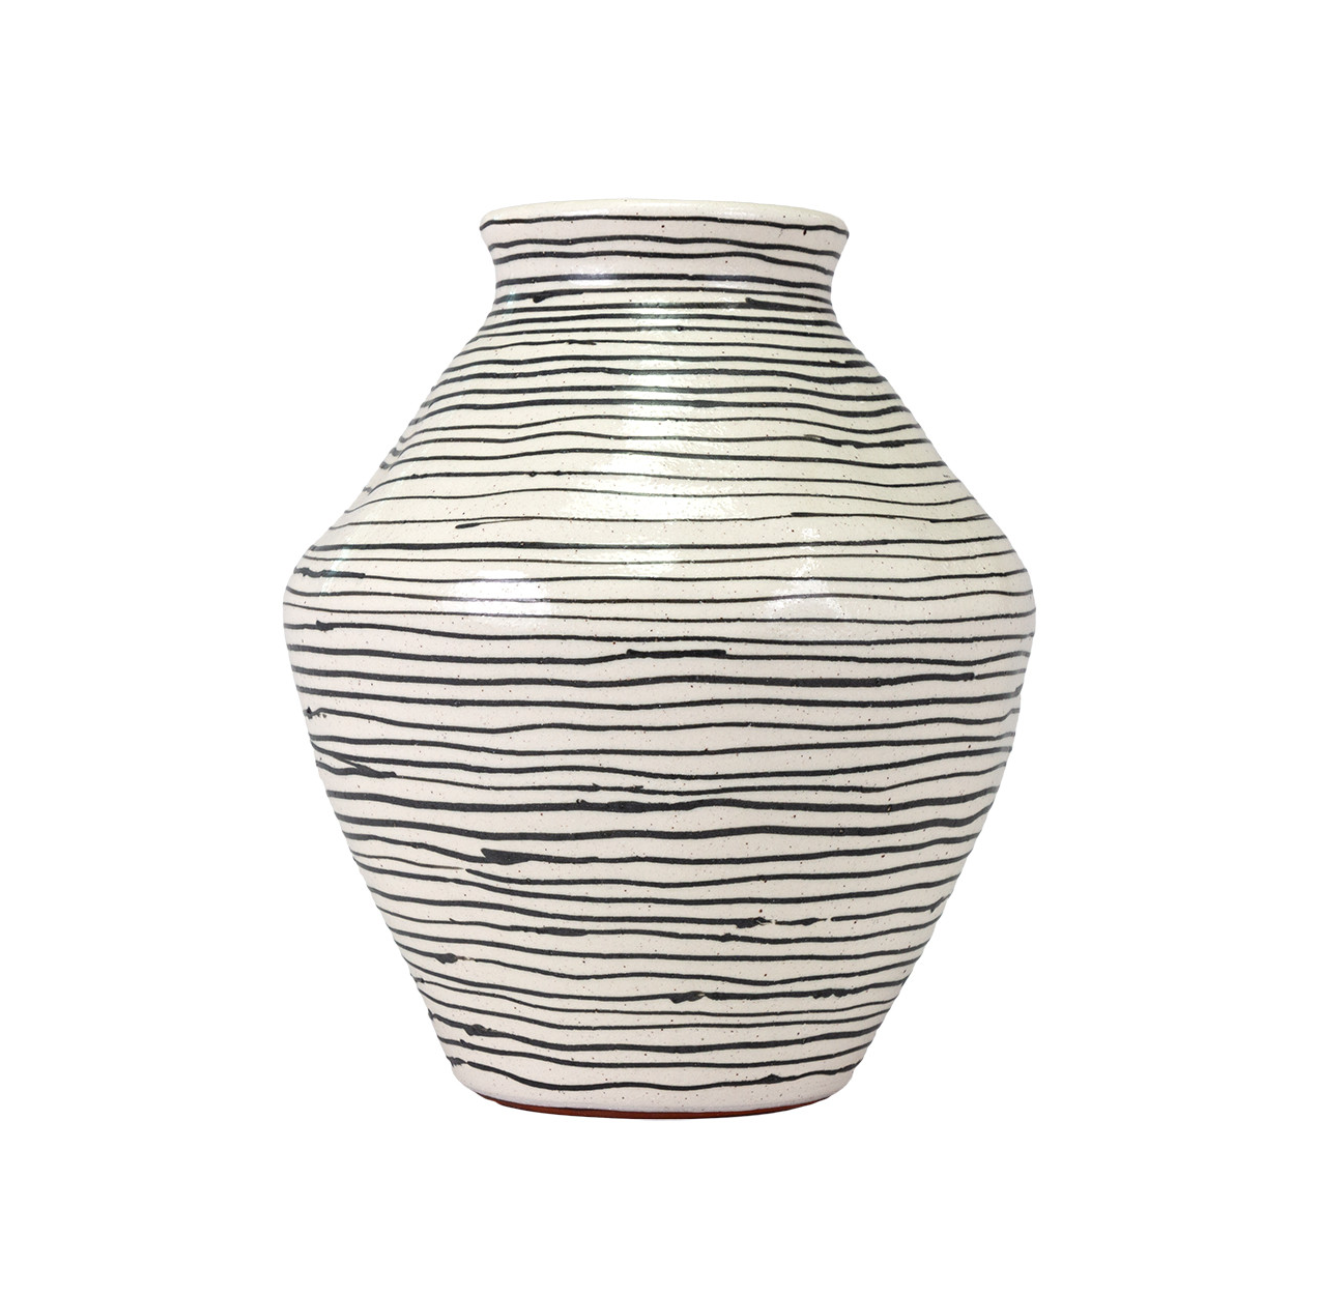 A Isha Tall vase from The Import Collection with a bulbous body and narrow neck, featuring a white glaze with horizontal black streaks. The surface texture appears slightly rough and irregular, perfect for a Scottsdale, Arizona bungalow.